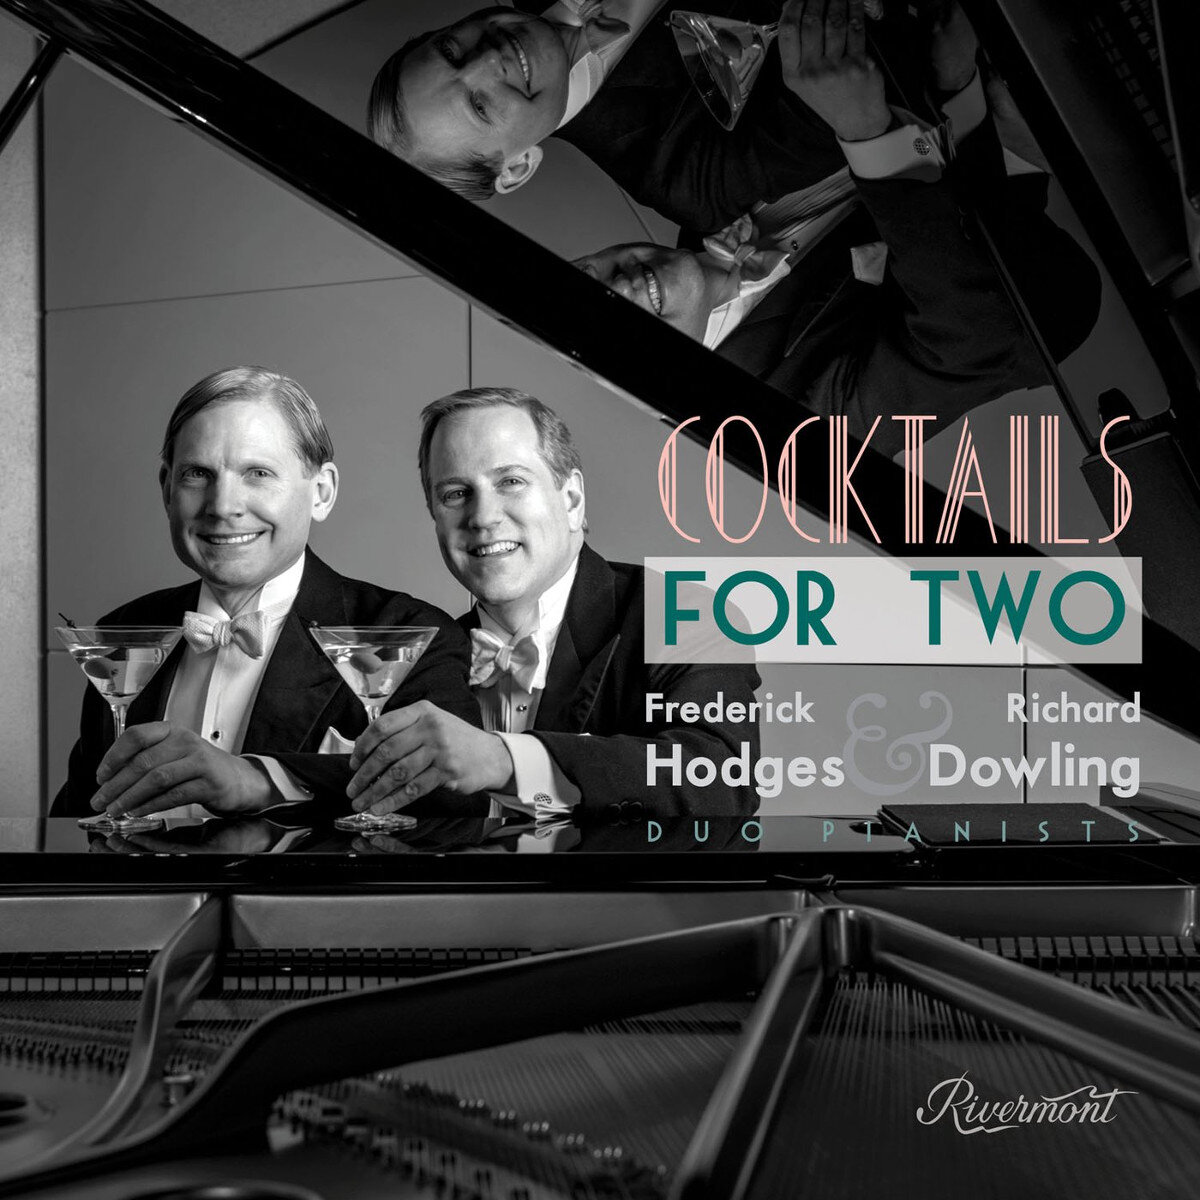 Frederick Hodges and Richard DowlingCocktails for Two